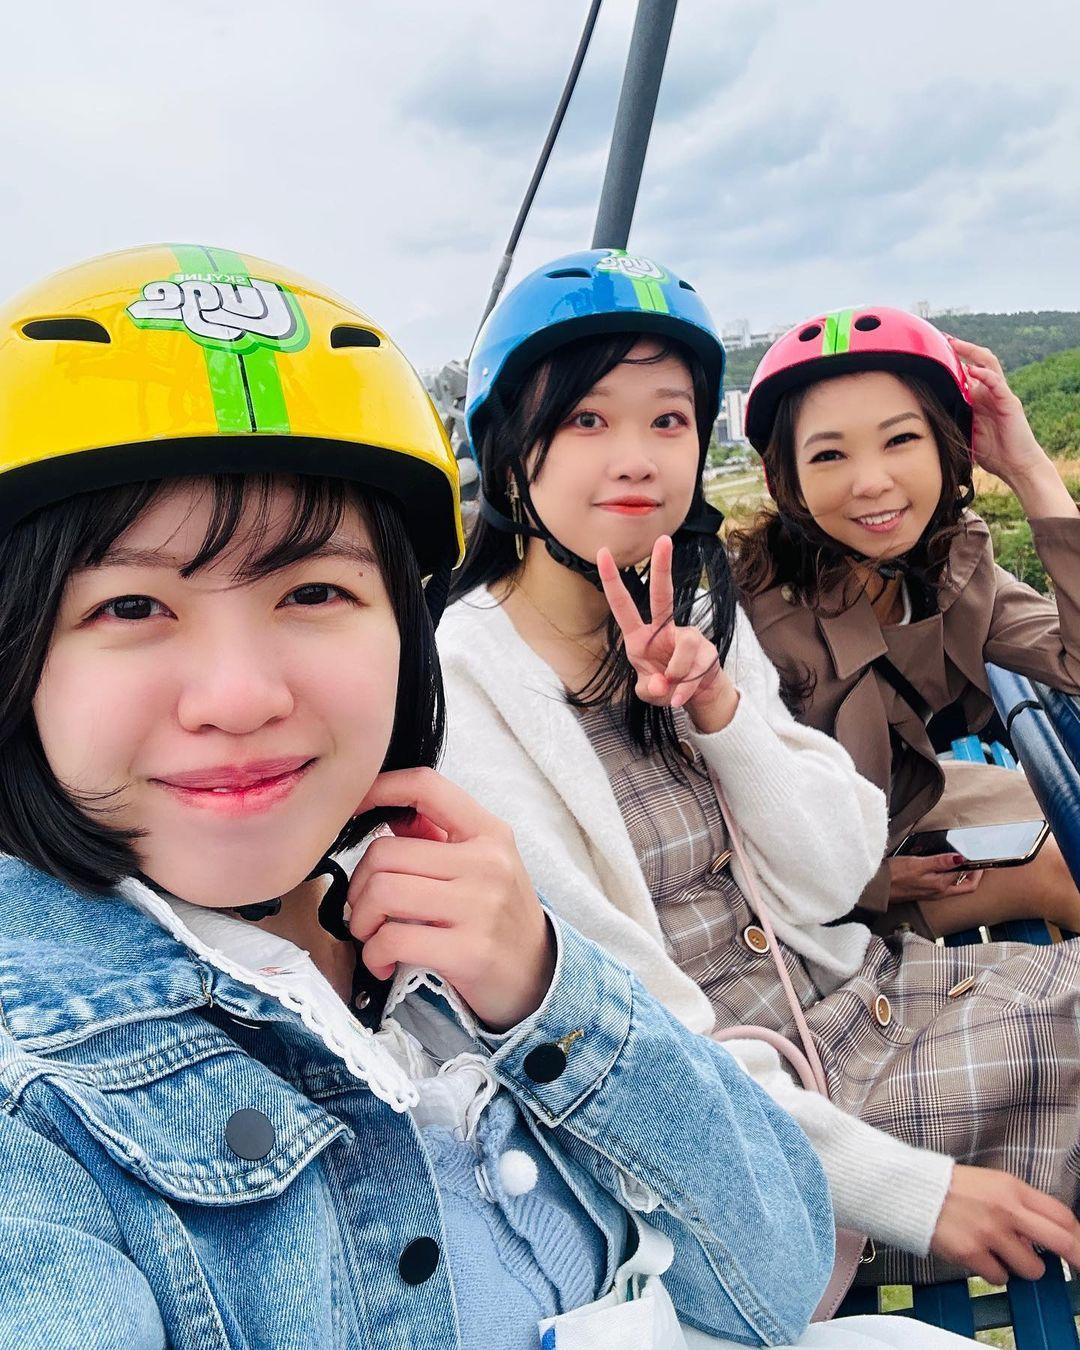 A group of friends ride the Skyride at Skyline Luge Busan.